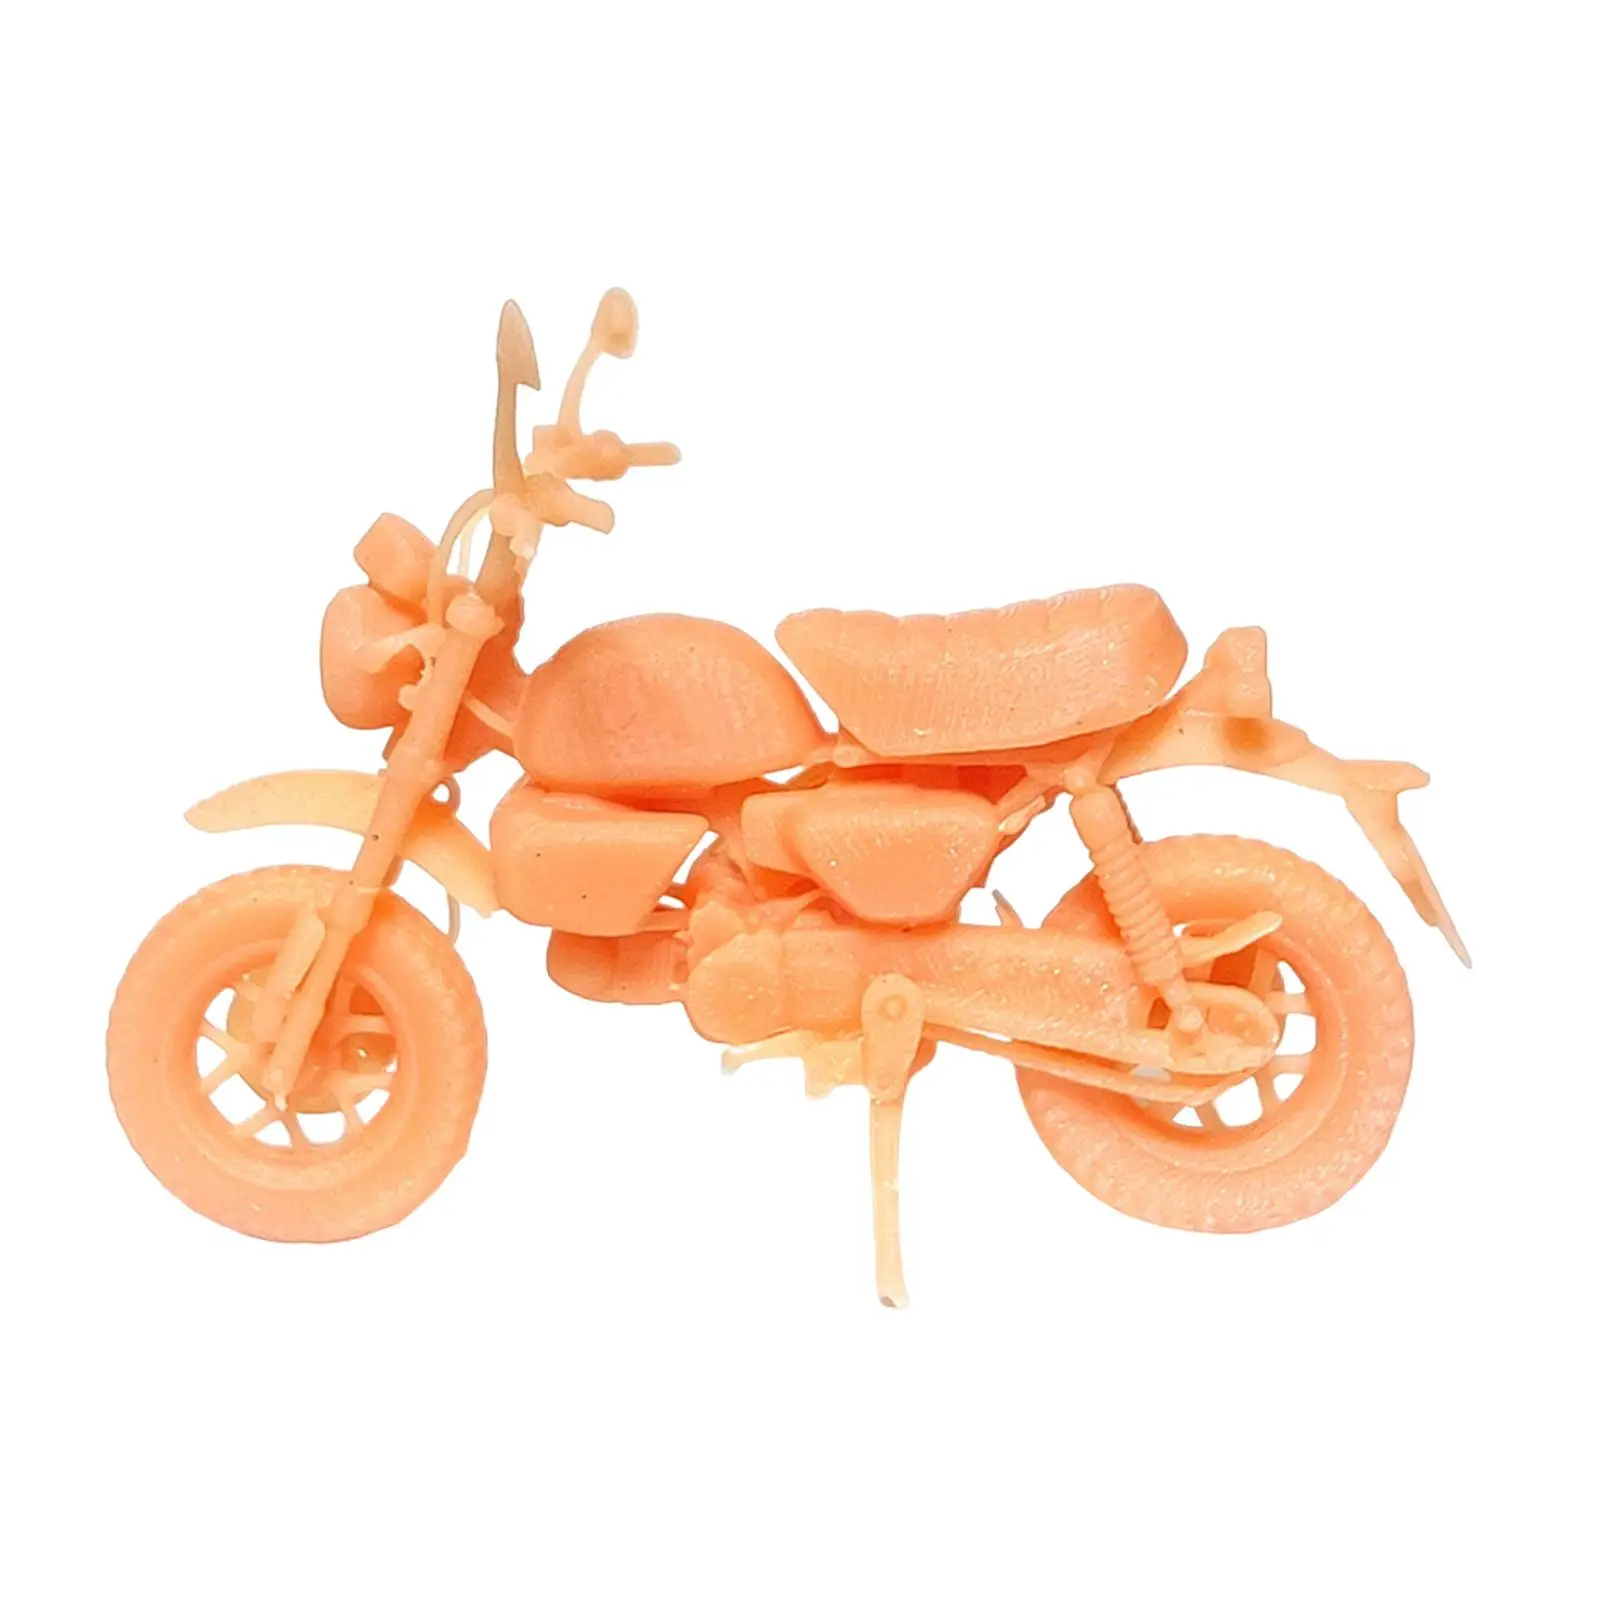 Resin 1:64 Motorcycle Model Mini Motorcycle Tiny Motorcycle for Miniature Scenes DIY Projects Layout Decoration Ornament